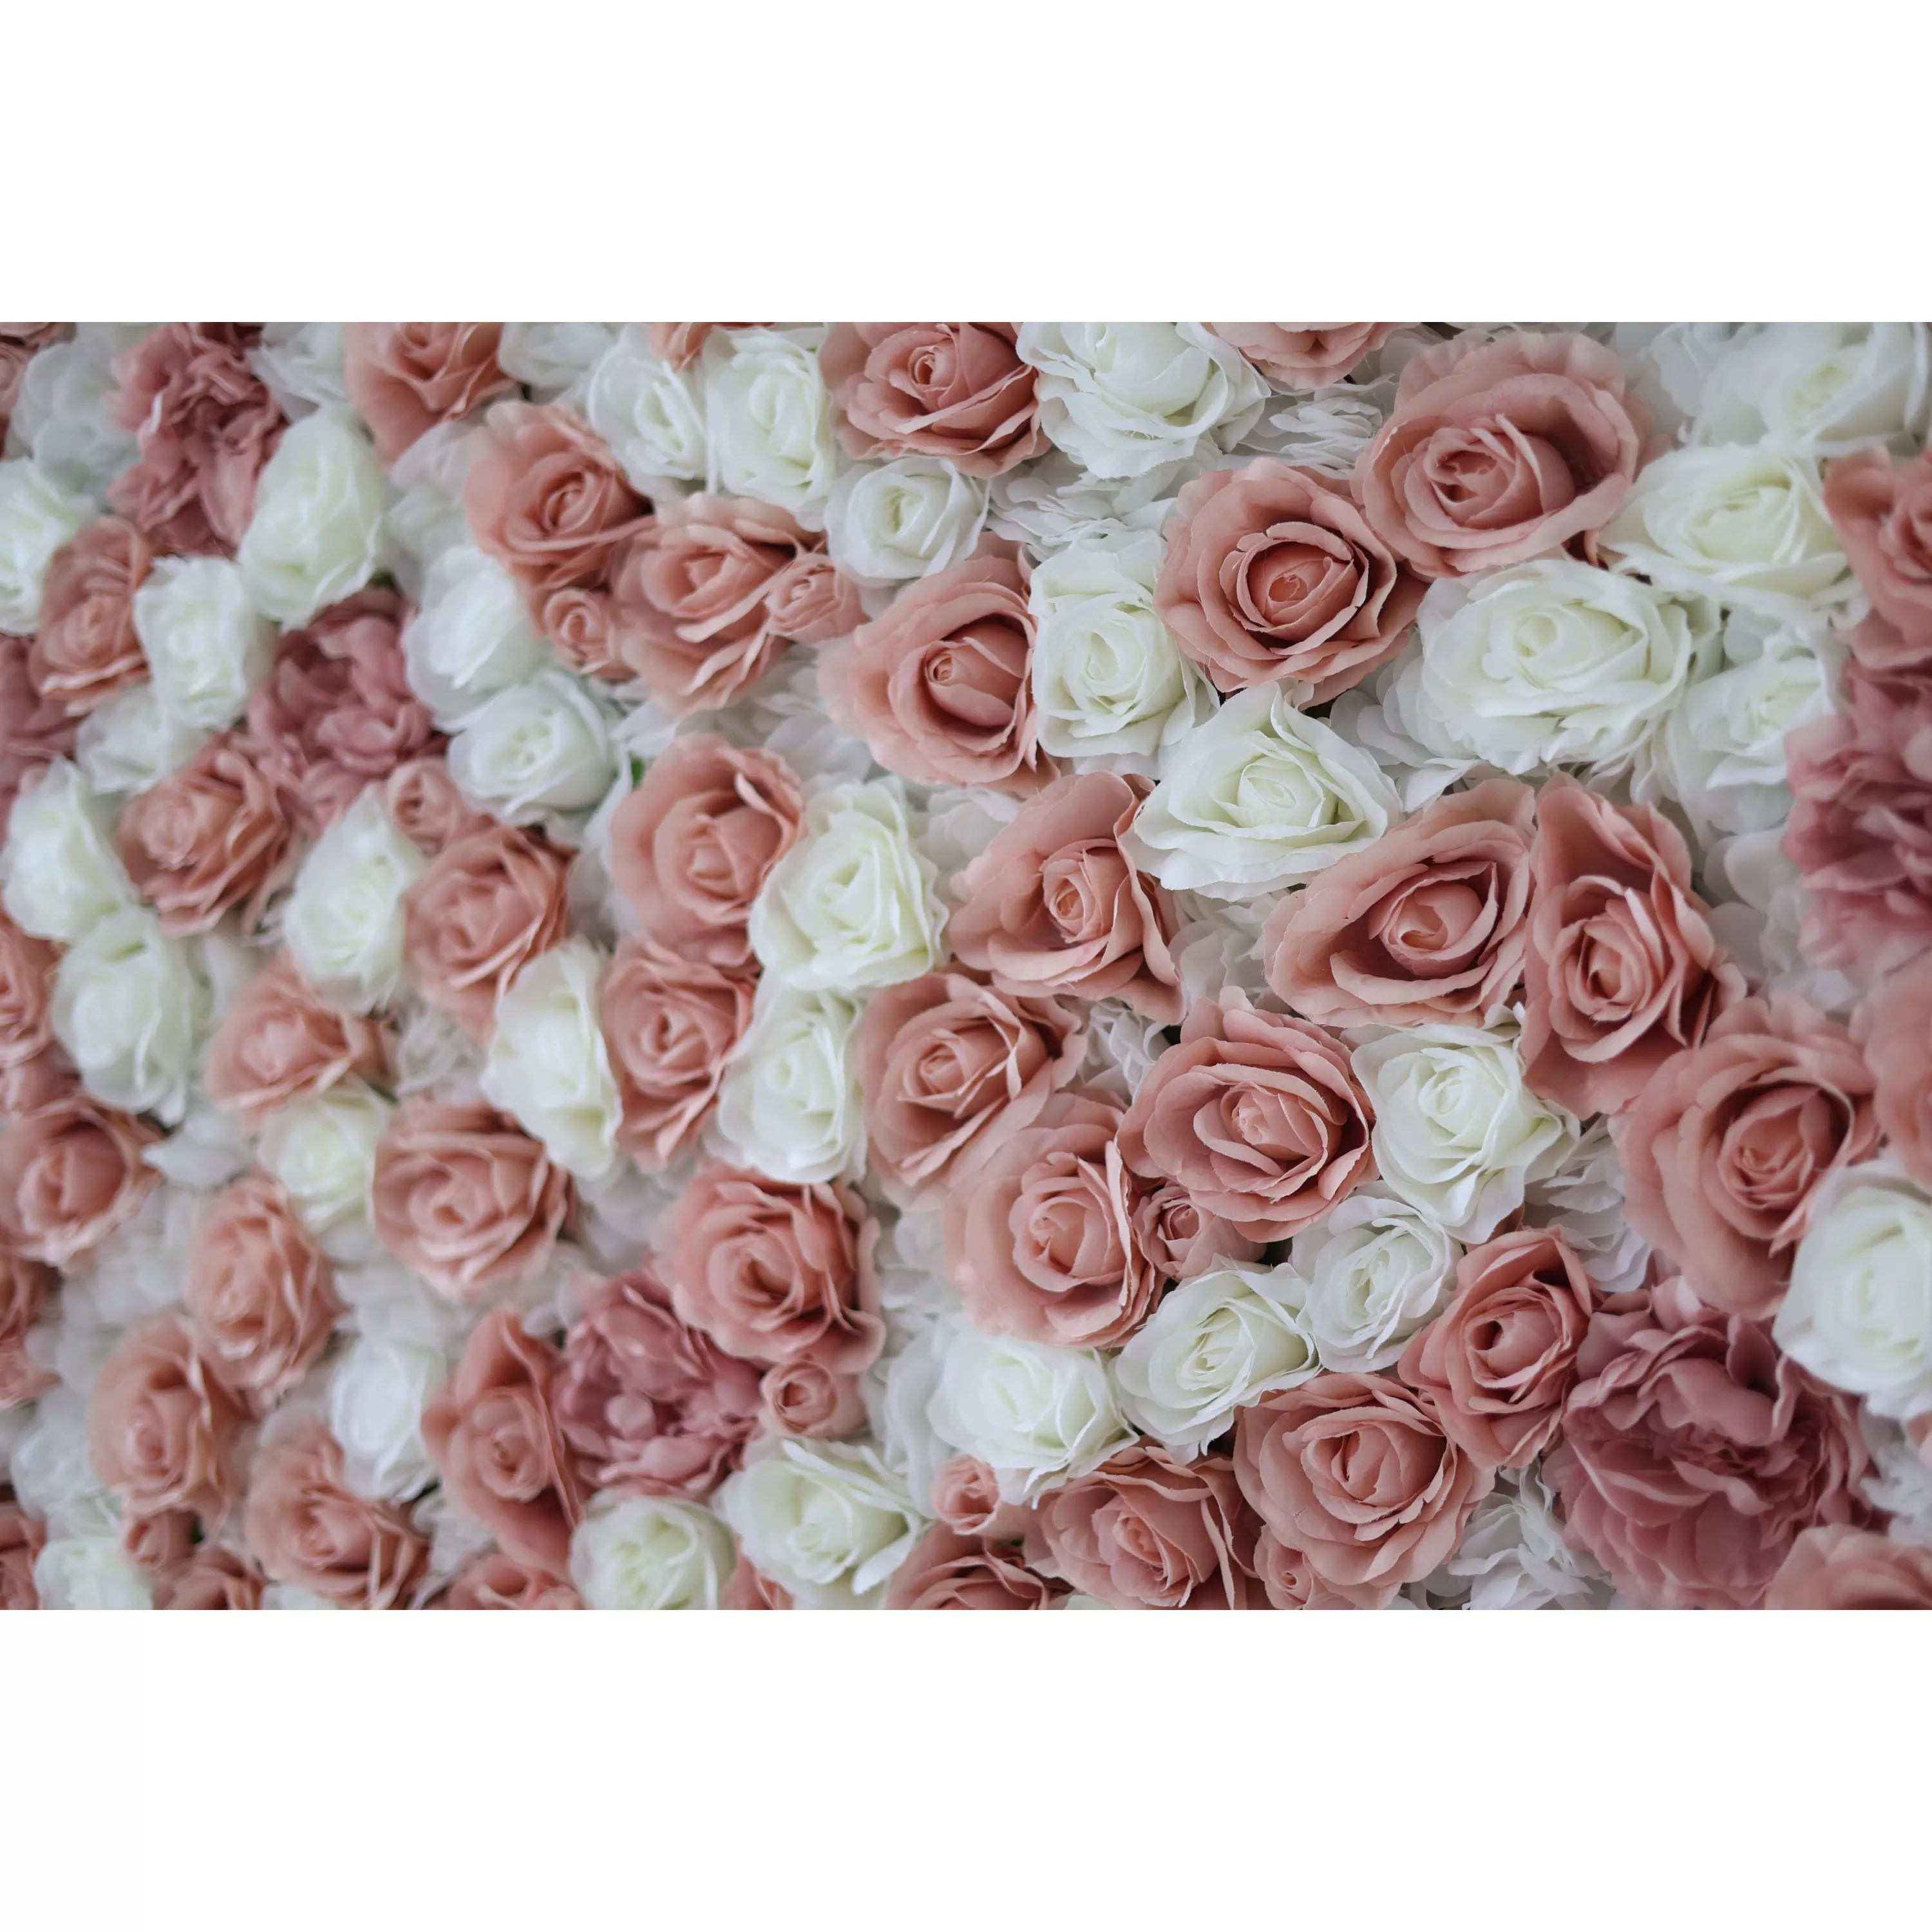 ValarFlowers Artificial Floral Wall Backdrop: Rosy Radiance - A Delicate Dance of Pink and White Roses-VF-277